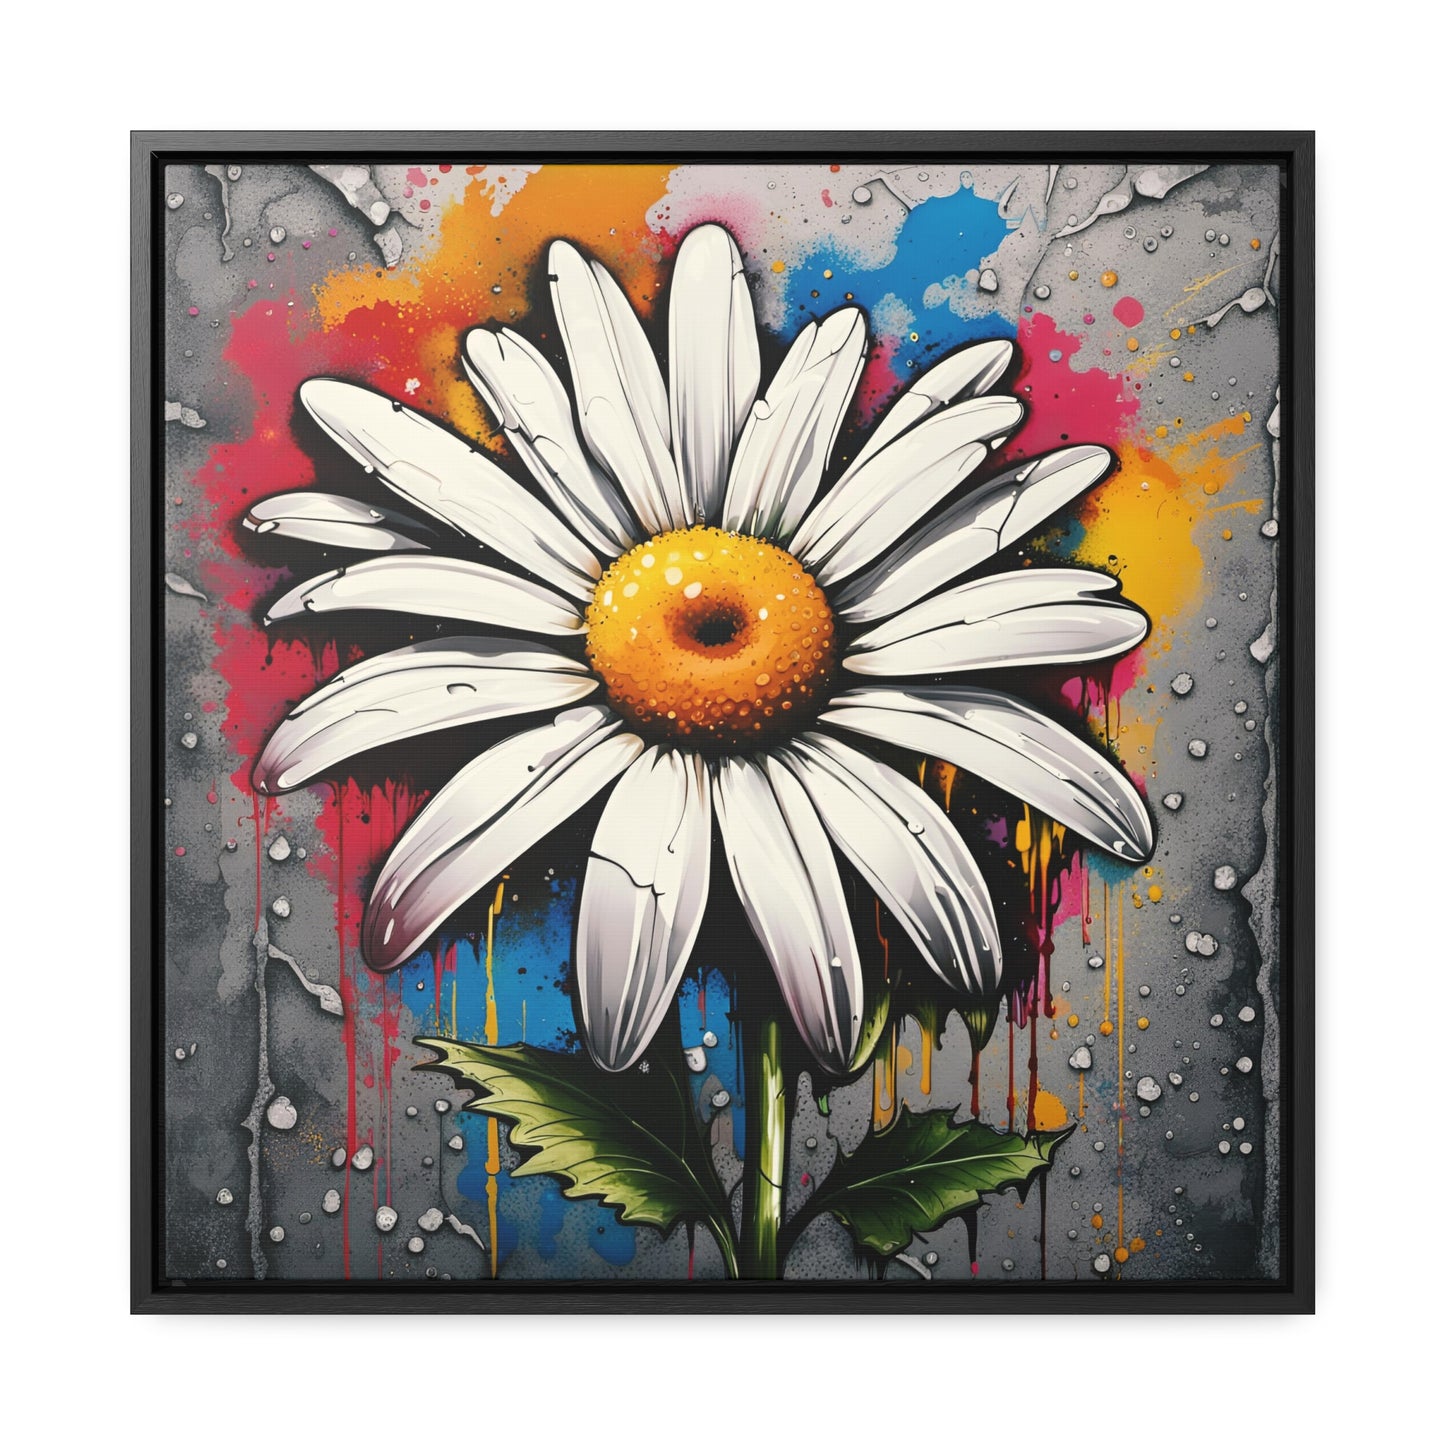 Floral themed Wall Art Print - Street Art Style Graffiti Daisy Printed on Canvas in a Floating Frame 5 sizes available